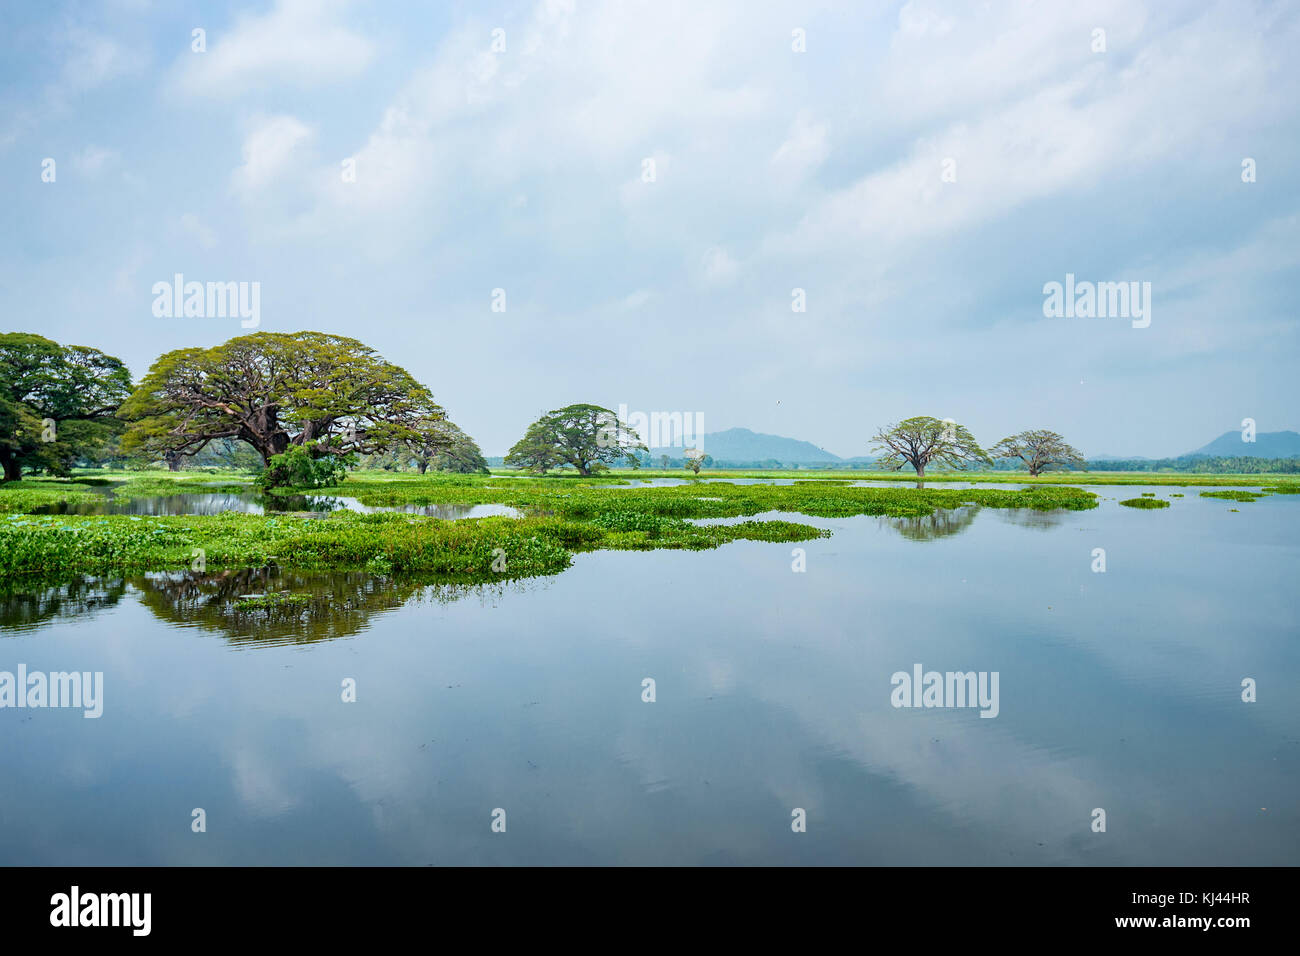 Scenic view of tropical lake with trees in water Stock Photo